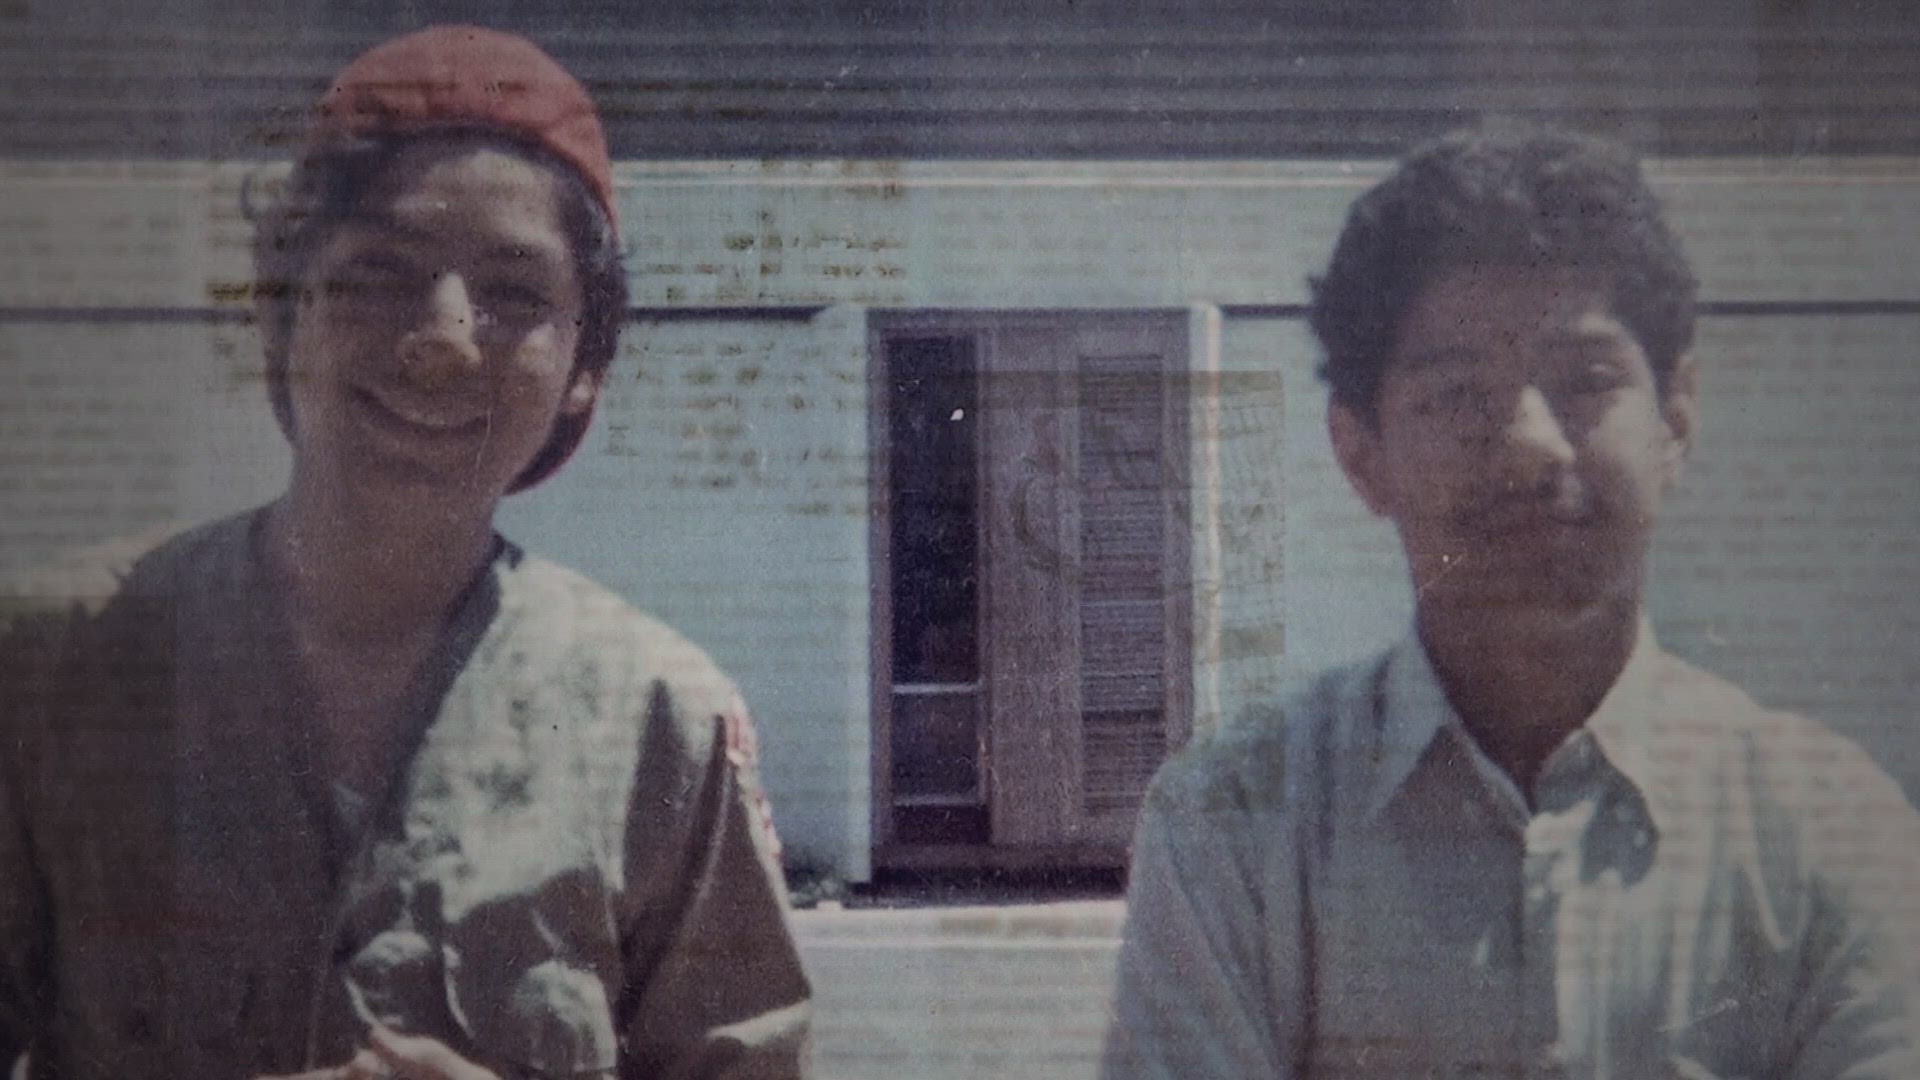 In July 1973, 12-year-old Santos Rodriguez was wrongfully detained and killed by a city police officer.